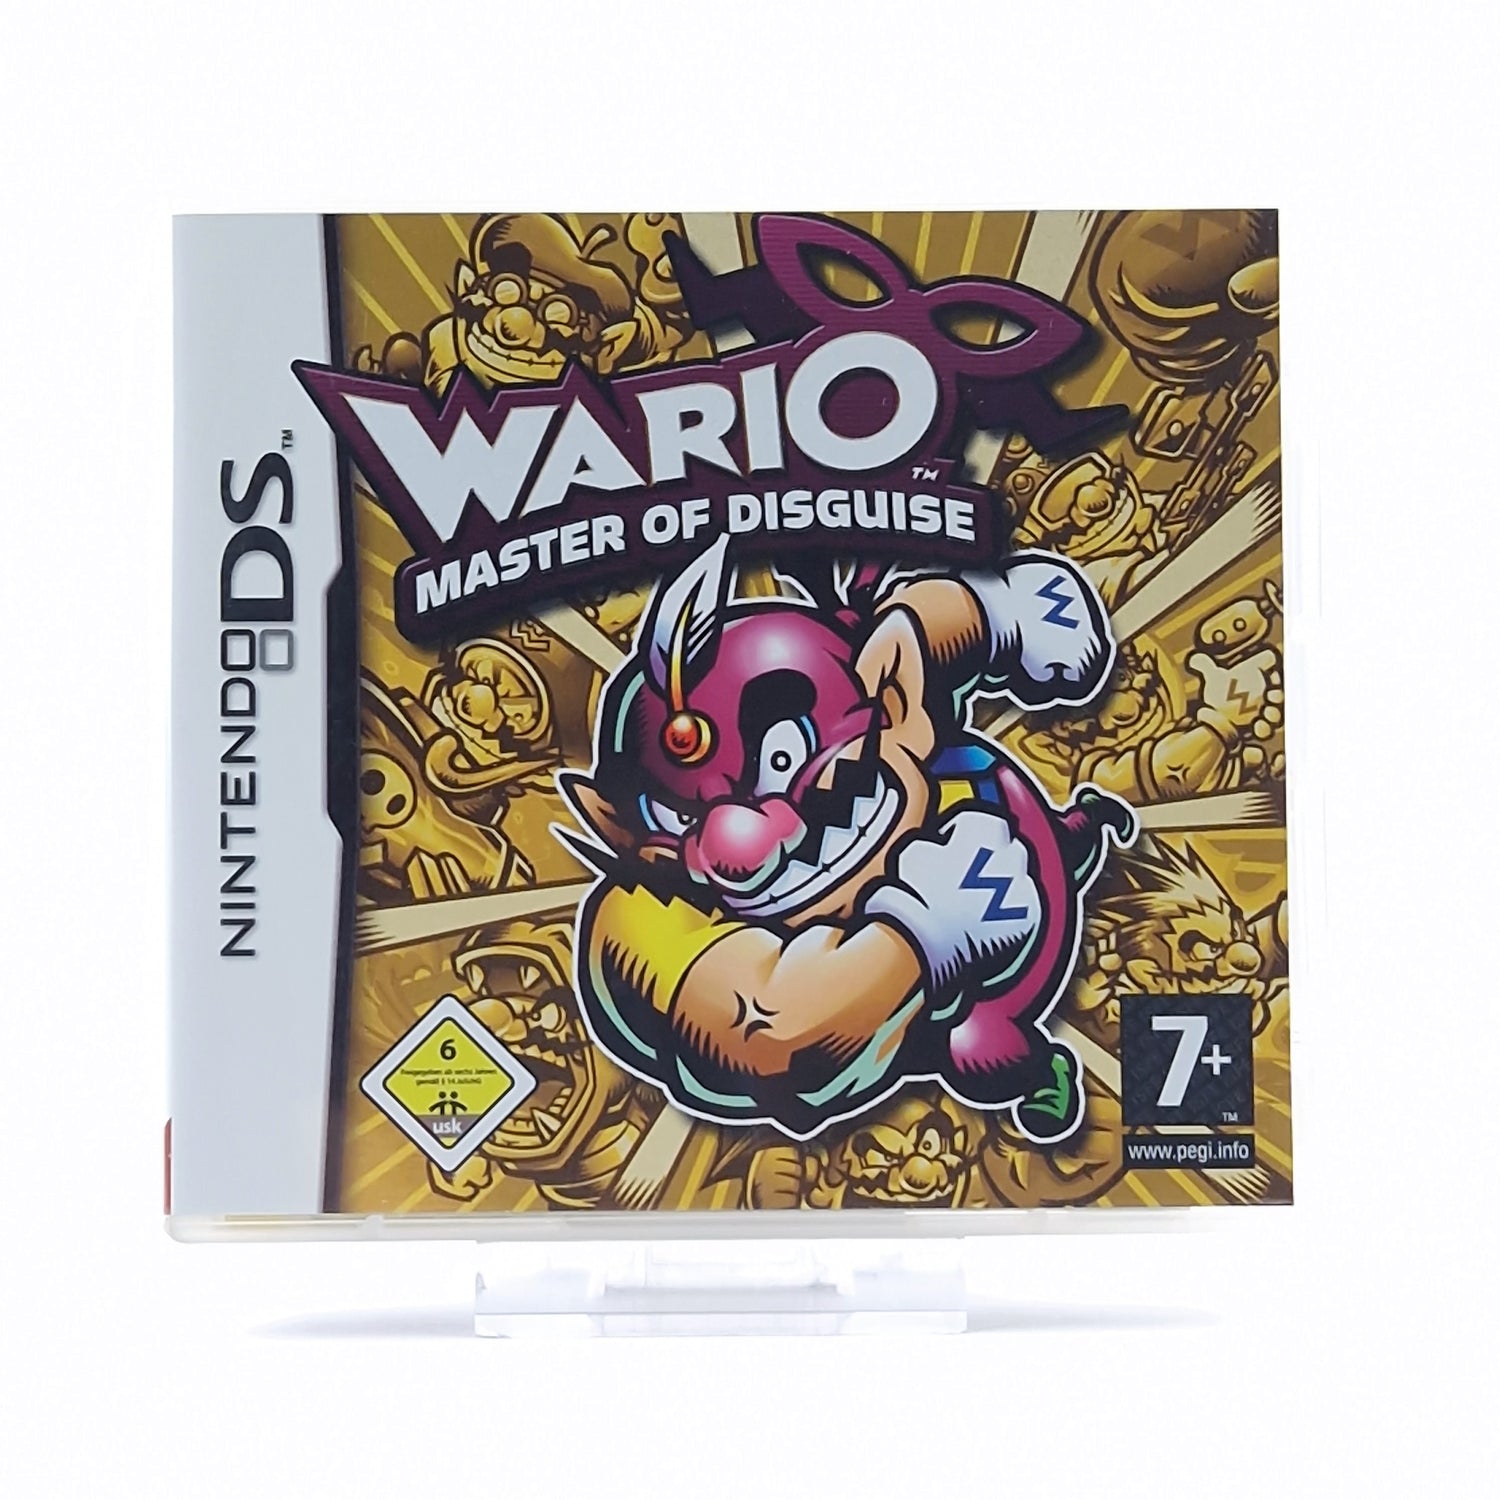 Nintendo DS Spiel : Wario Master of Disguise - OVP Anleitung PAL Game | 3DS